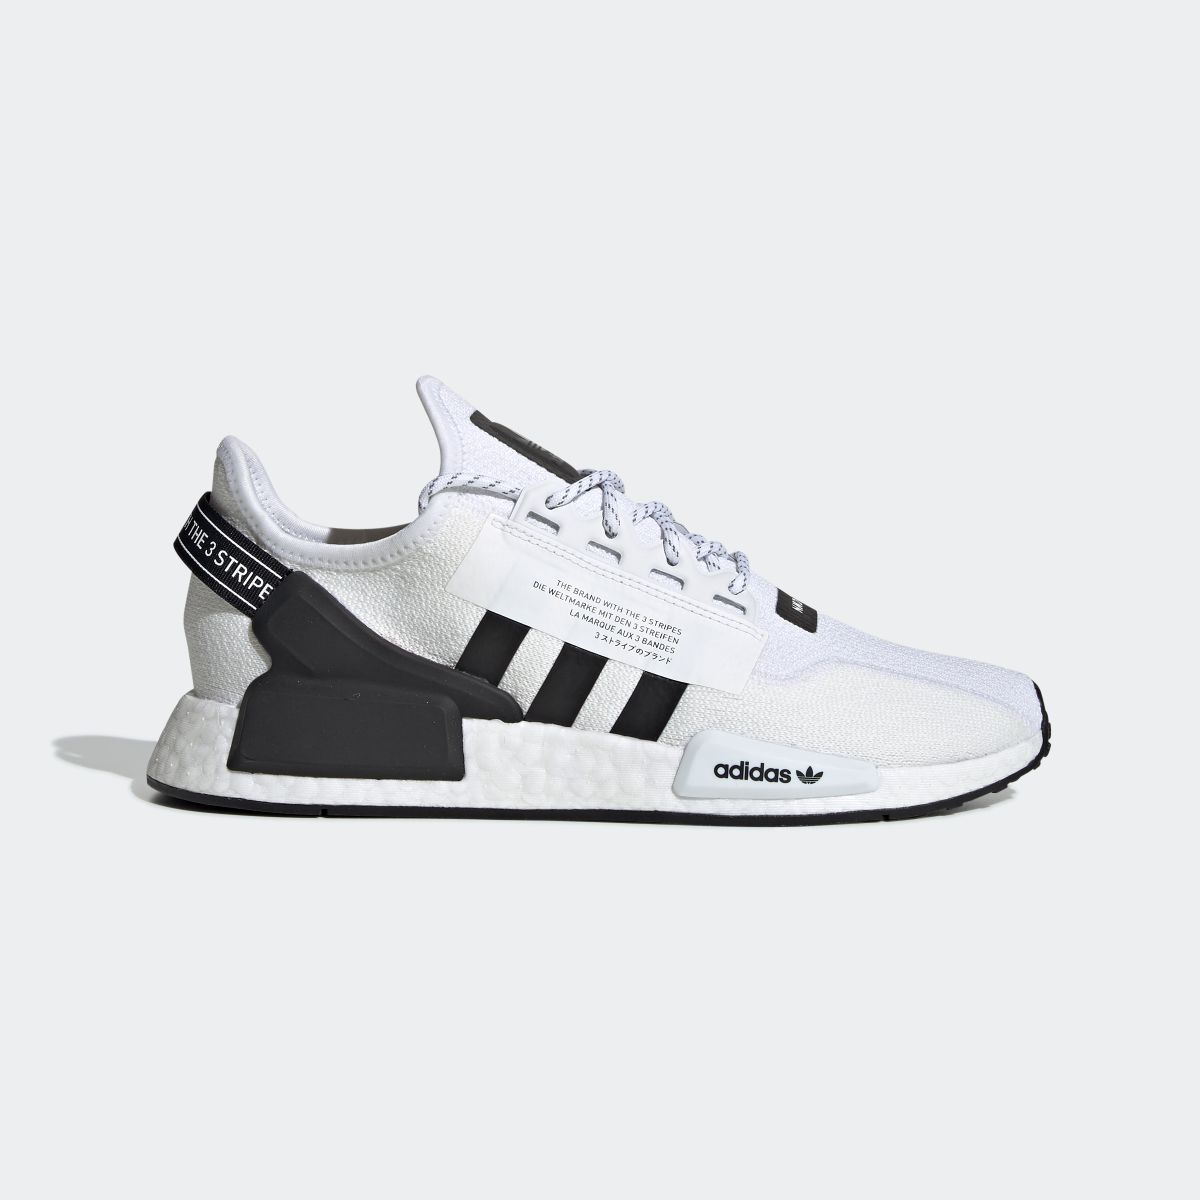 Adidas Originals By Bed win The Heartbreakers Nmd R1 Runner